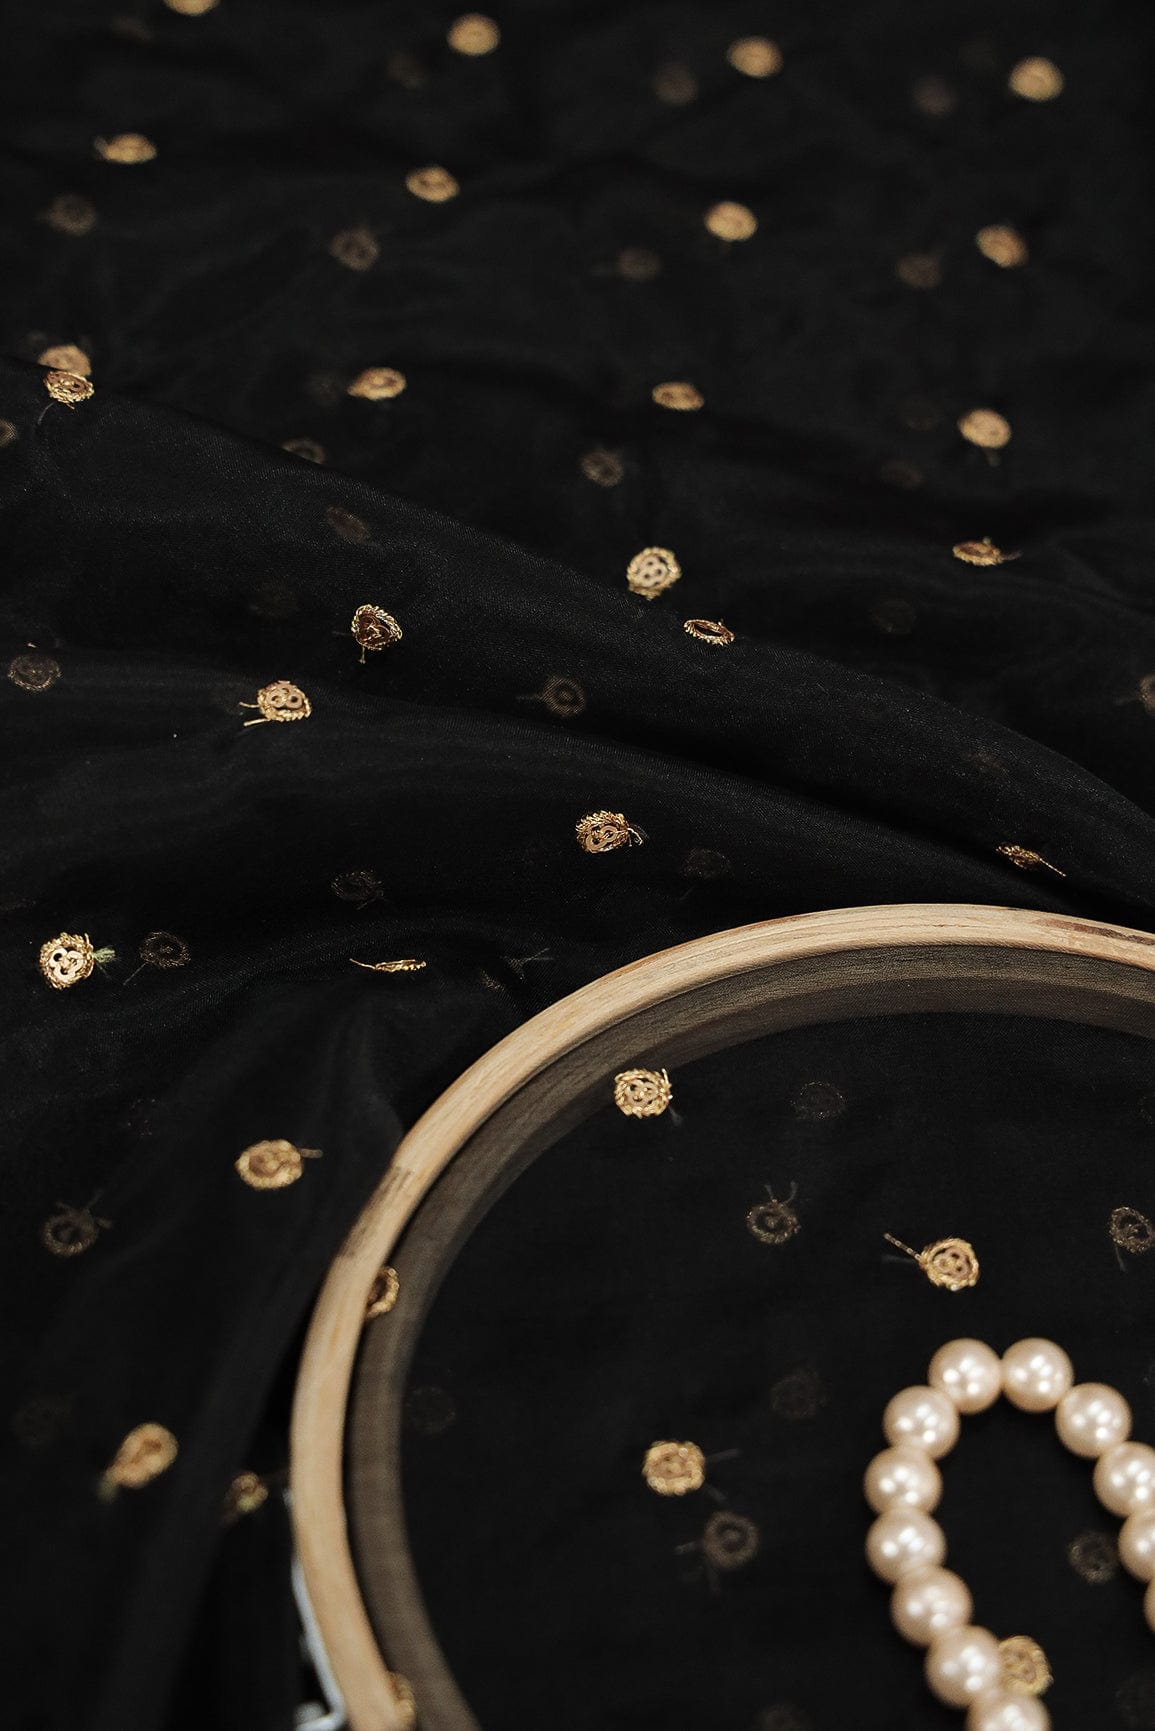 doeraa Embroidery Fabrics Gold Sequins with Gold Thread Motif Embroidery on Black Organza Fabric